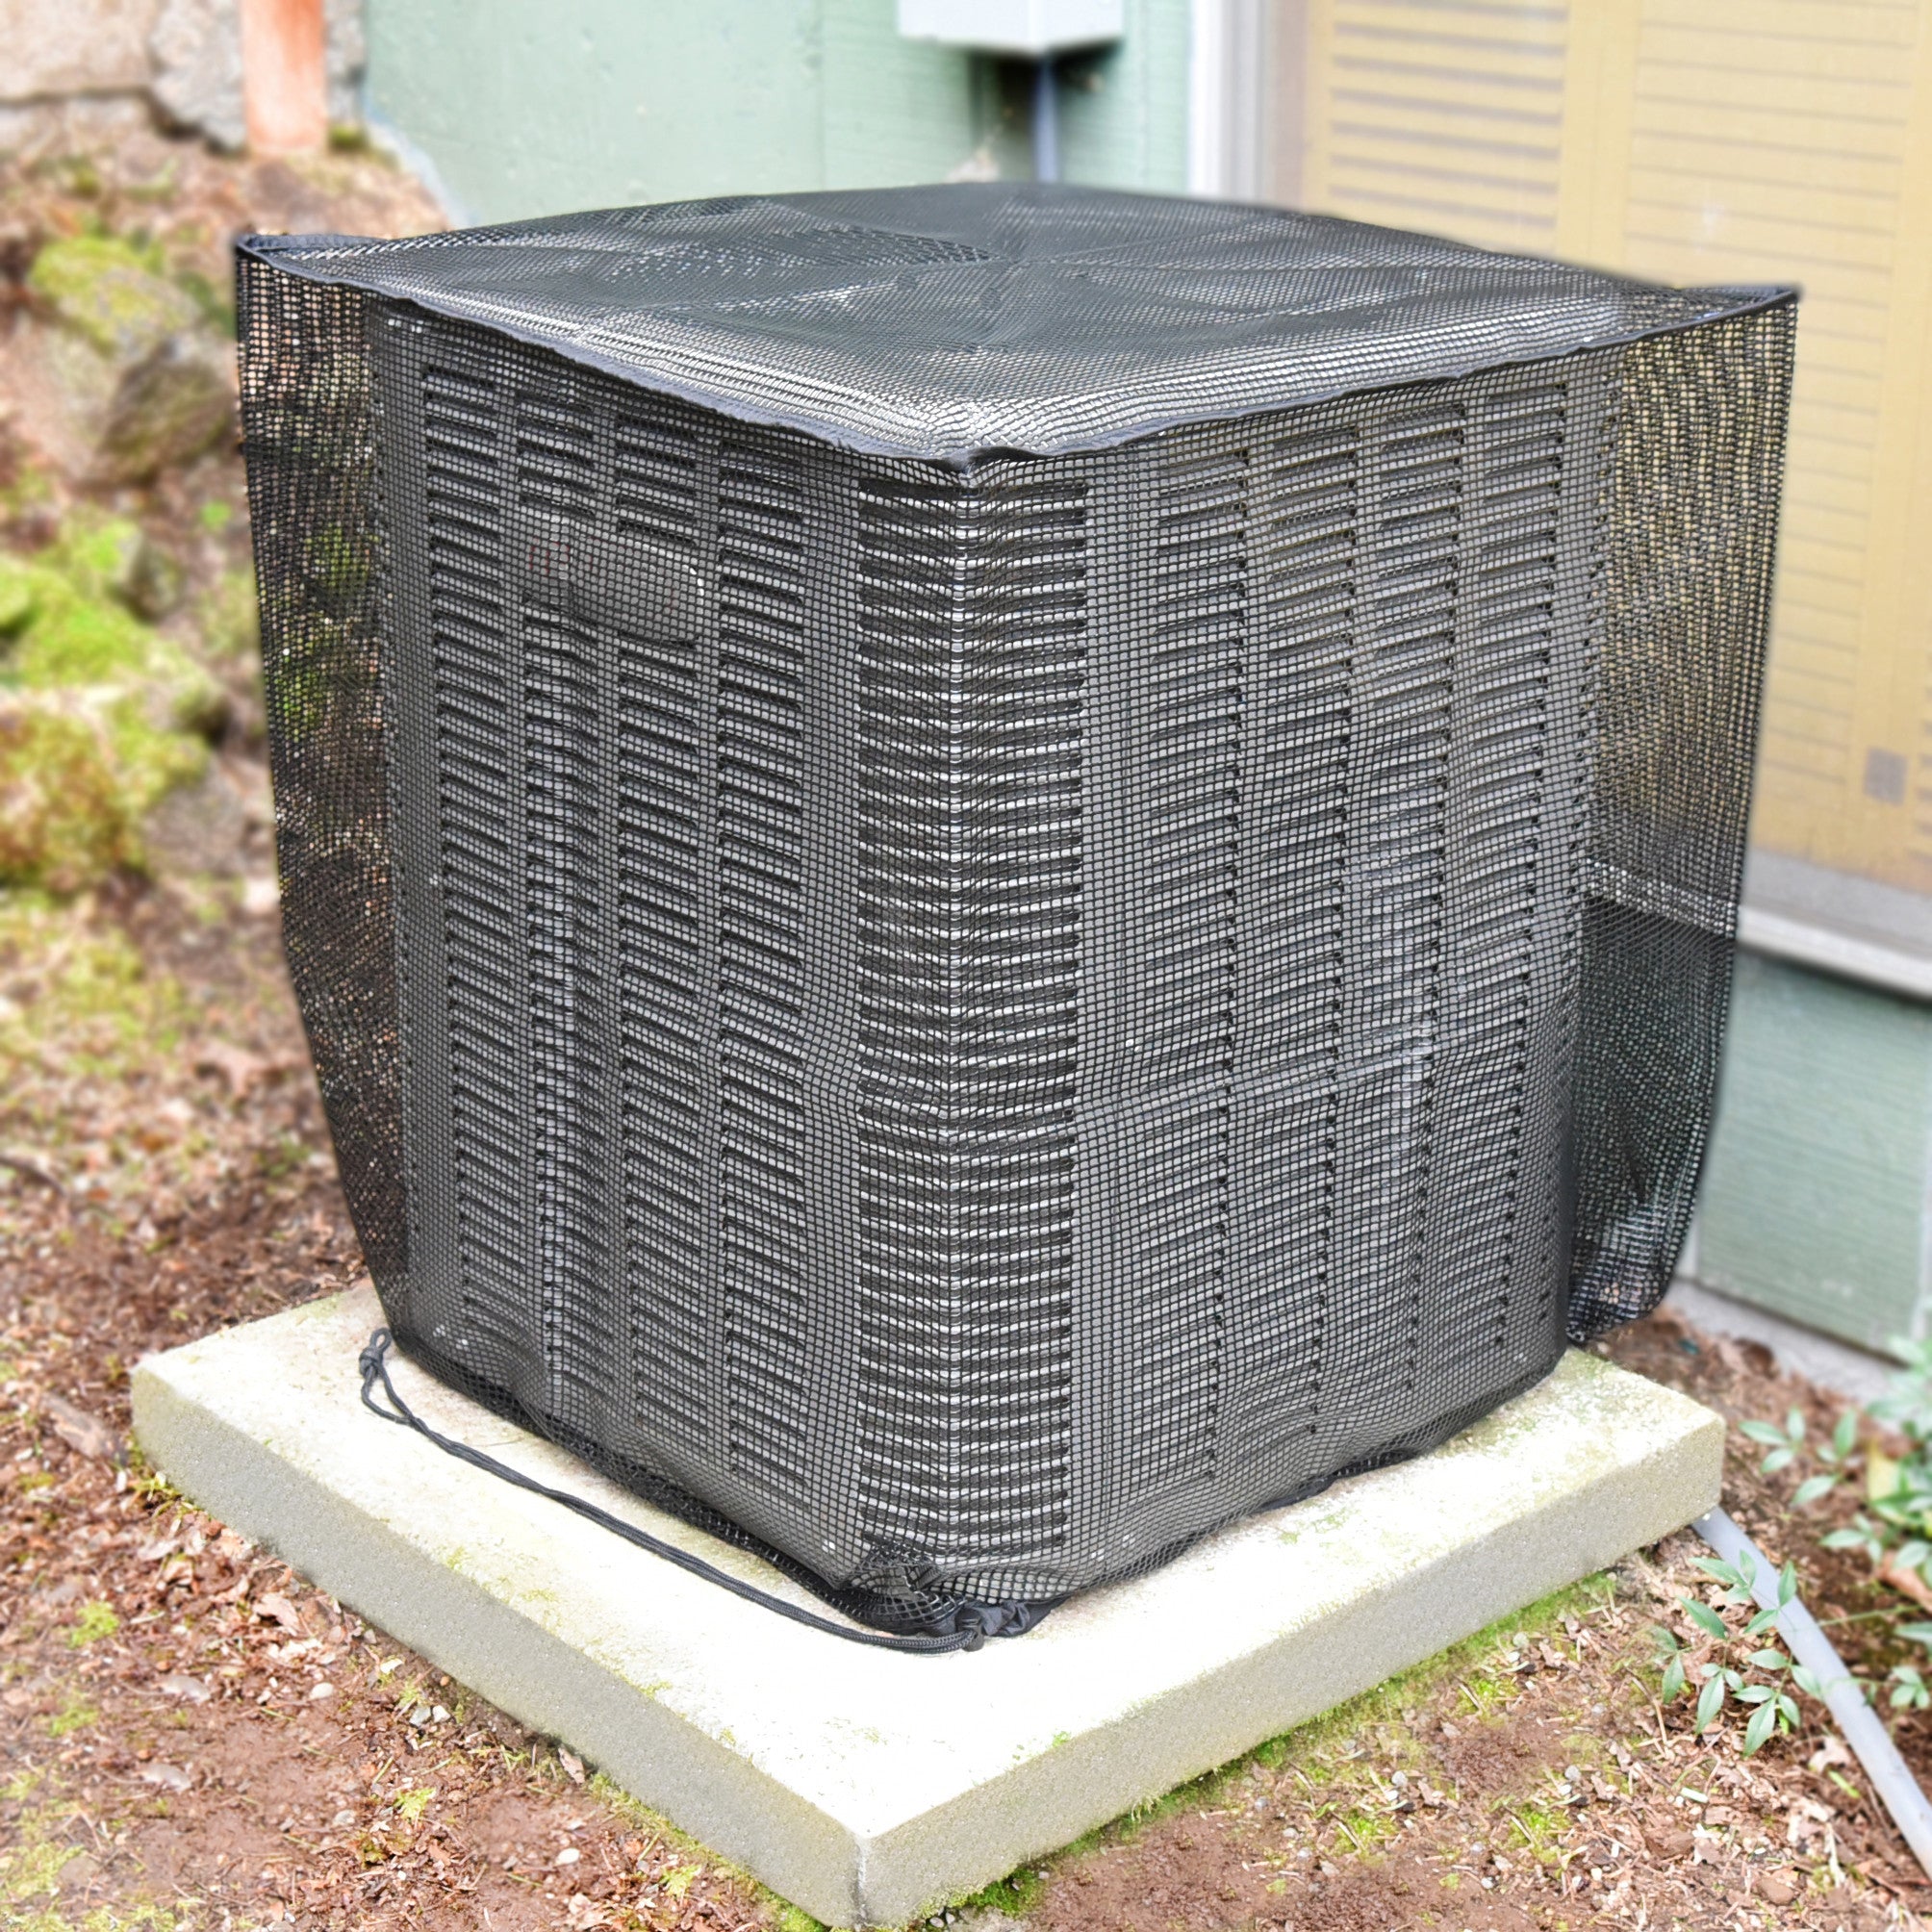 Covering Black AC Cover on Air Conditioning Unit Large Cover